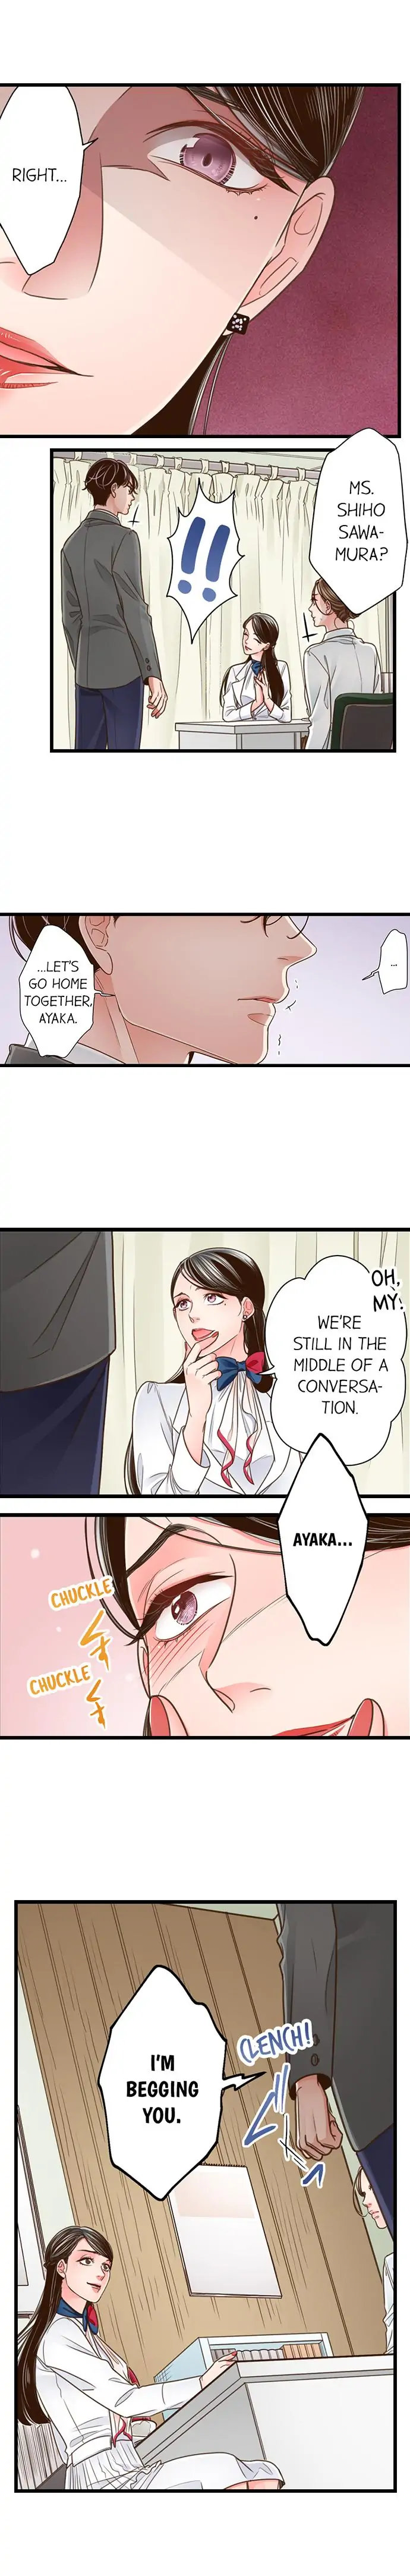 Yanagihara Is a Sex Addict - Chapter 166 Page 2